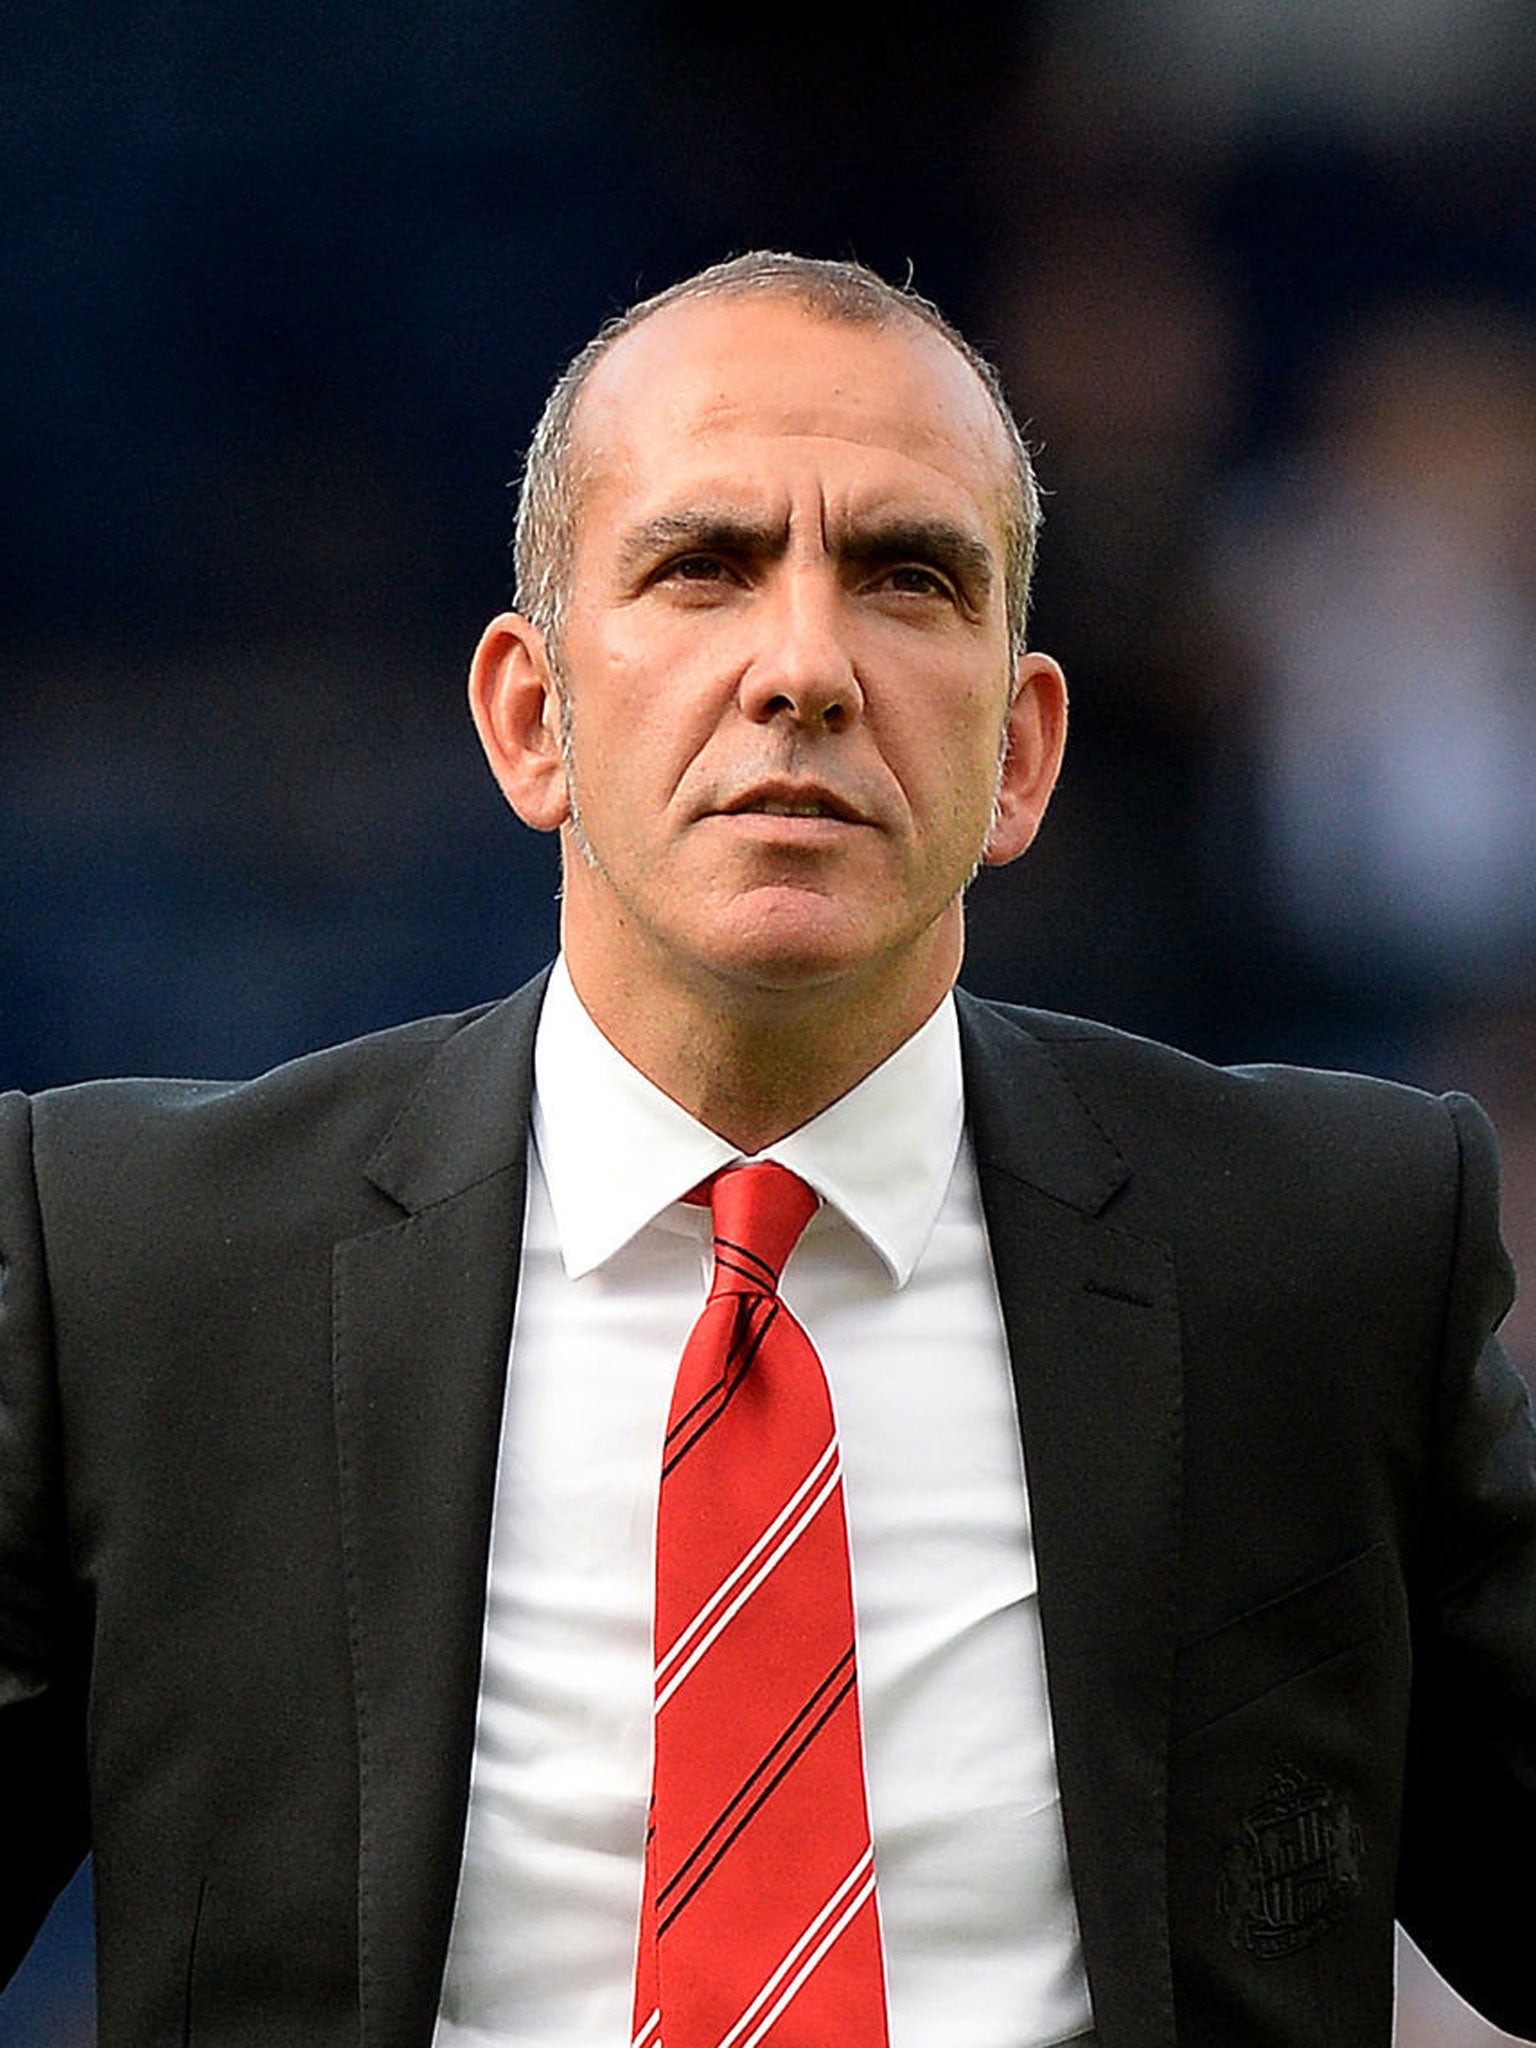 Paolo Di Canio said ‘I cannot be a fake Di Canio,’ when asked about his management style